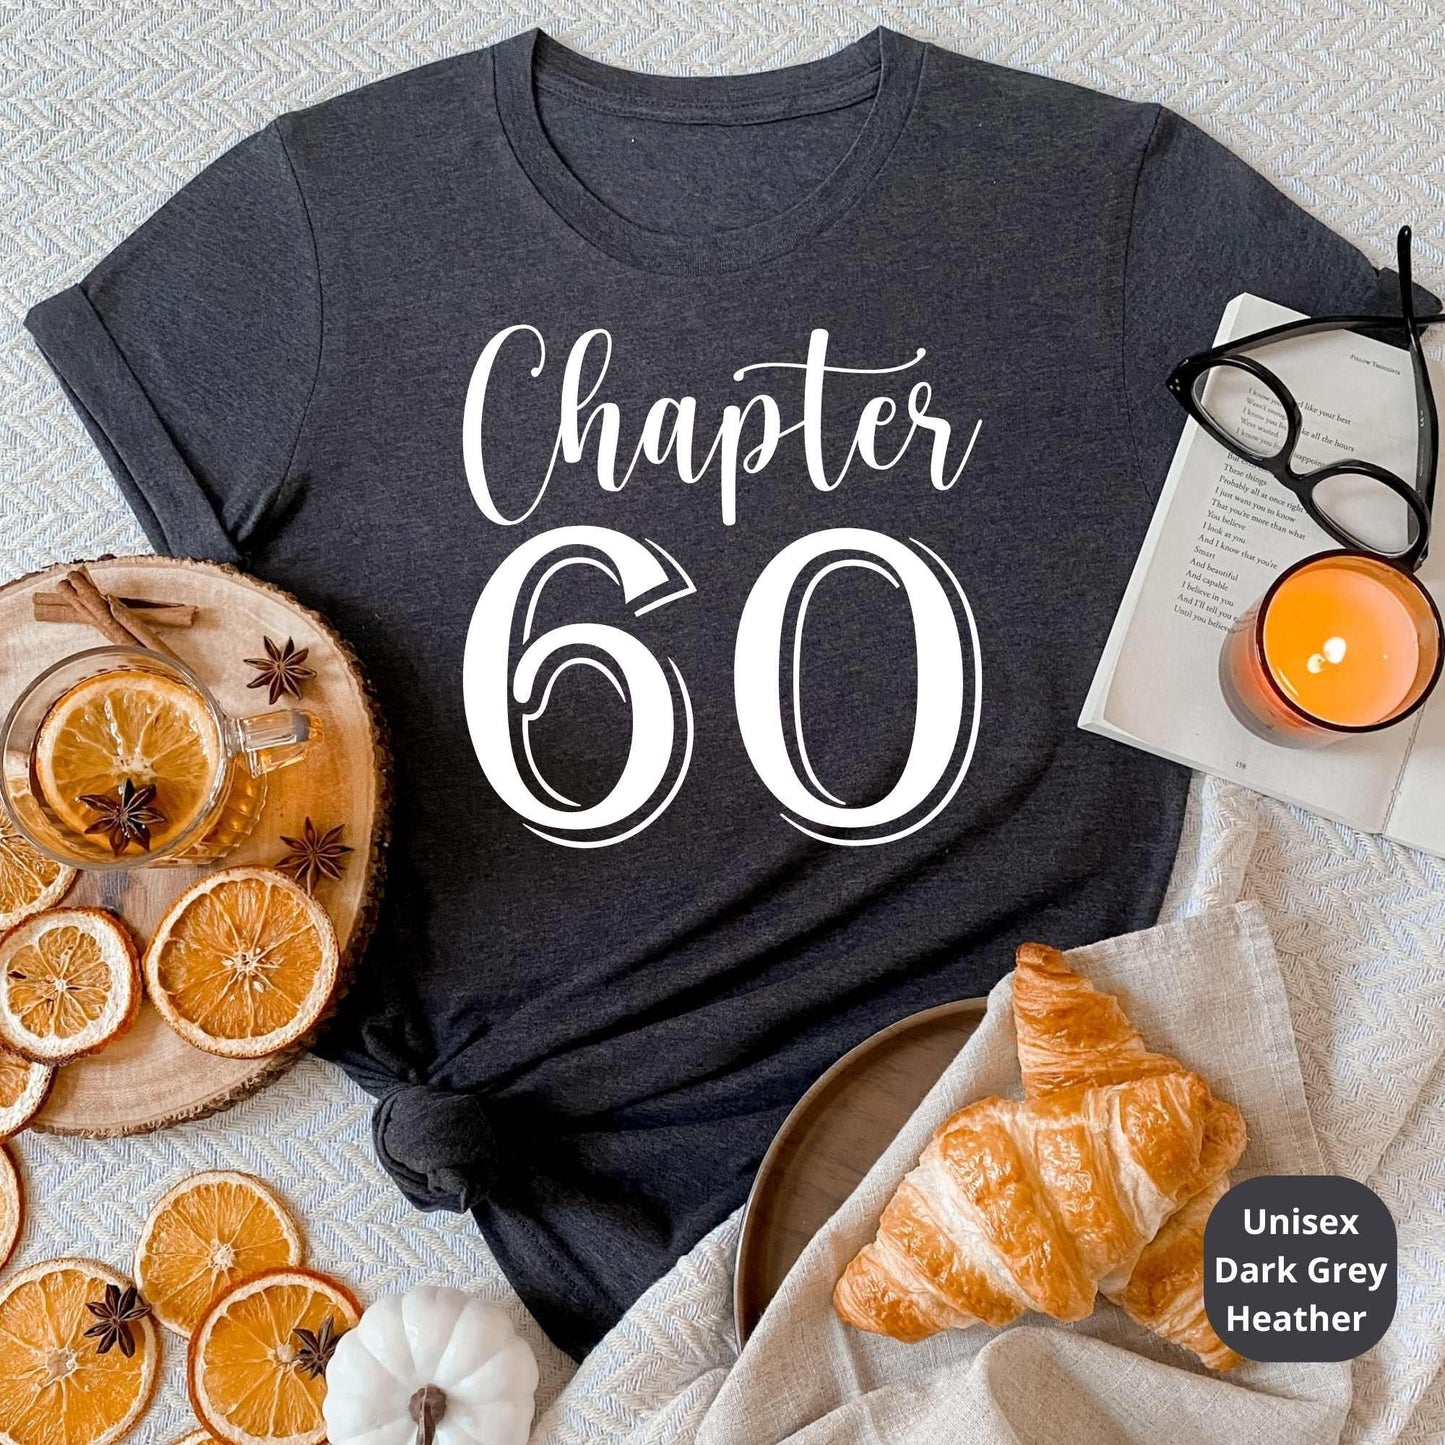 60th Birthday Shirt, Chapter 60 Birthday Gift, Great for Grands, Parents, Aunt, Cousins & Loved Ones Bday Party or Anniversary Celebration HMDesignStudioUS